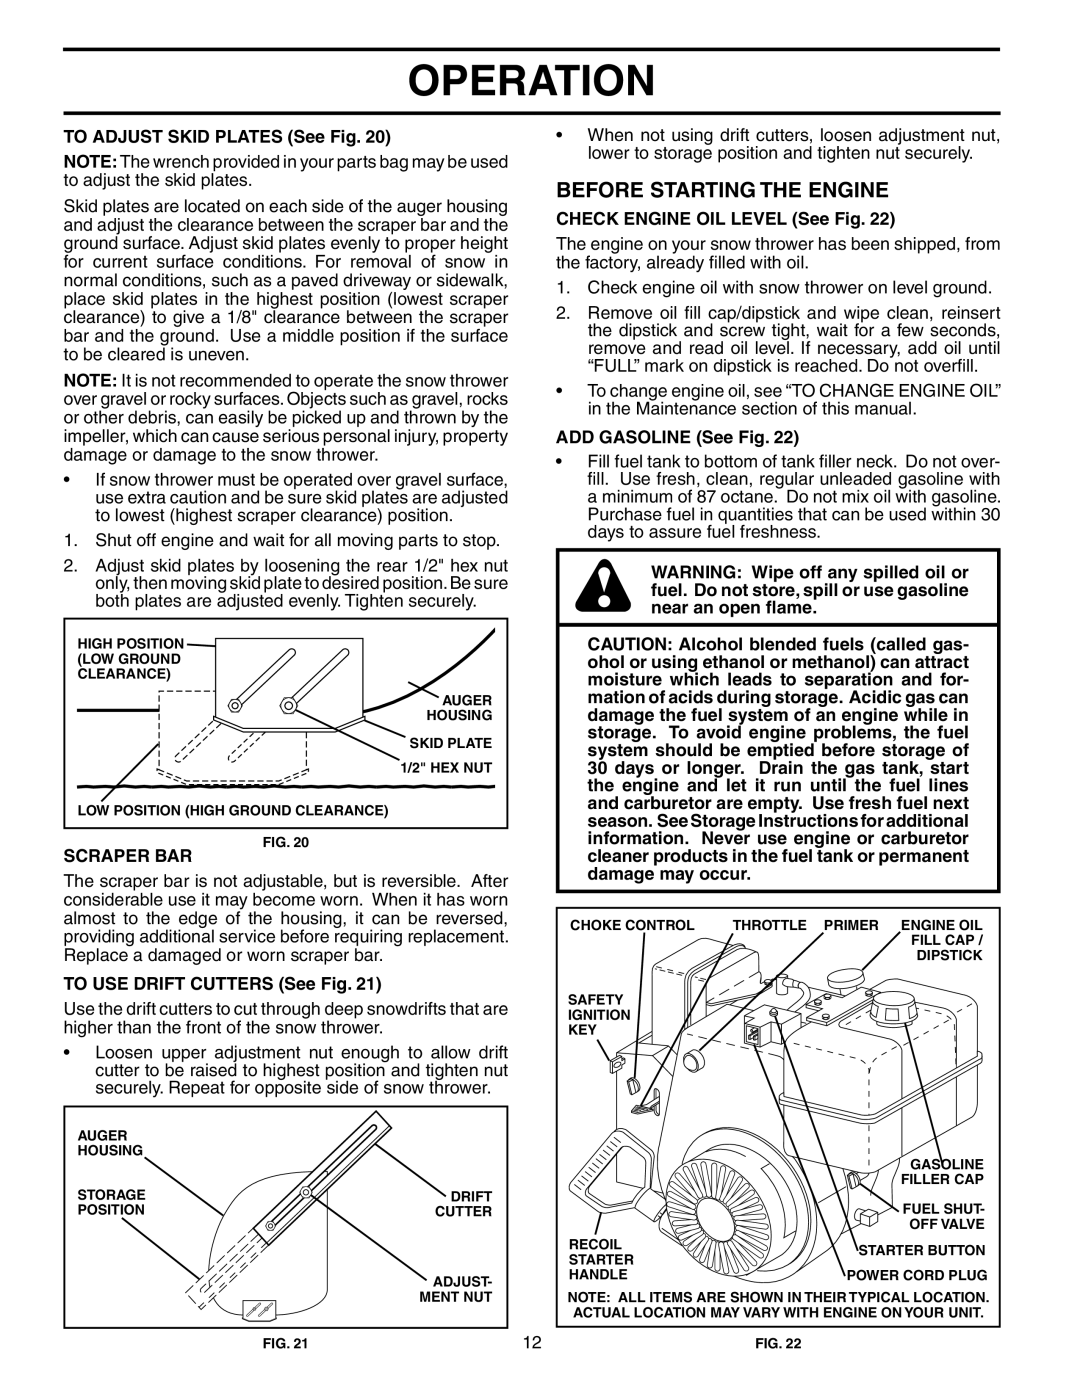 Husqvarna 1130STE XP owner manual Operation, Before Starting The Engine, TO ADJUST SKID PLATES See Fig, Scraper Bar 